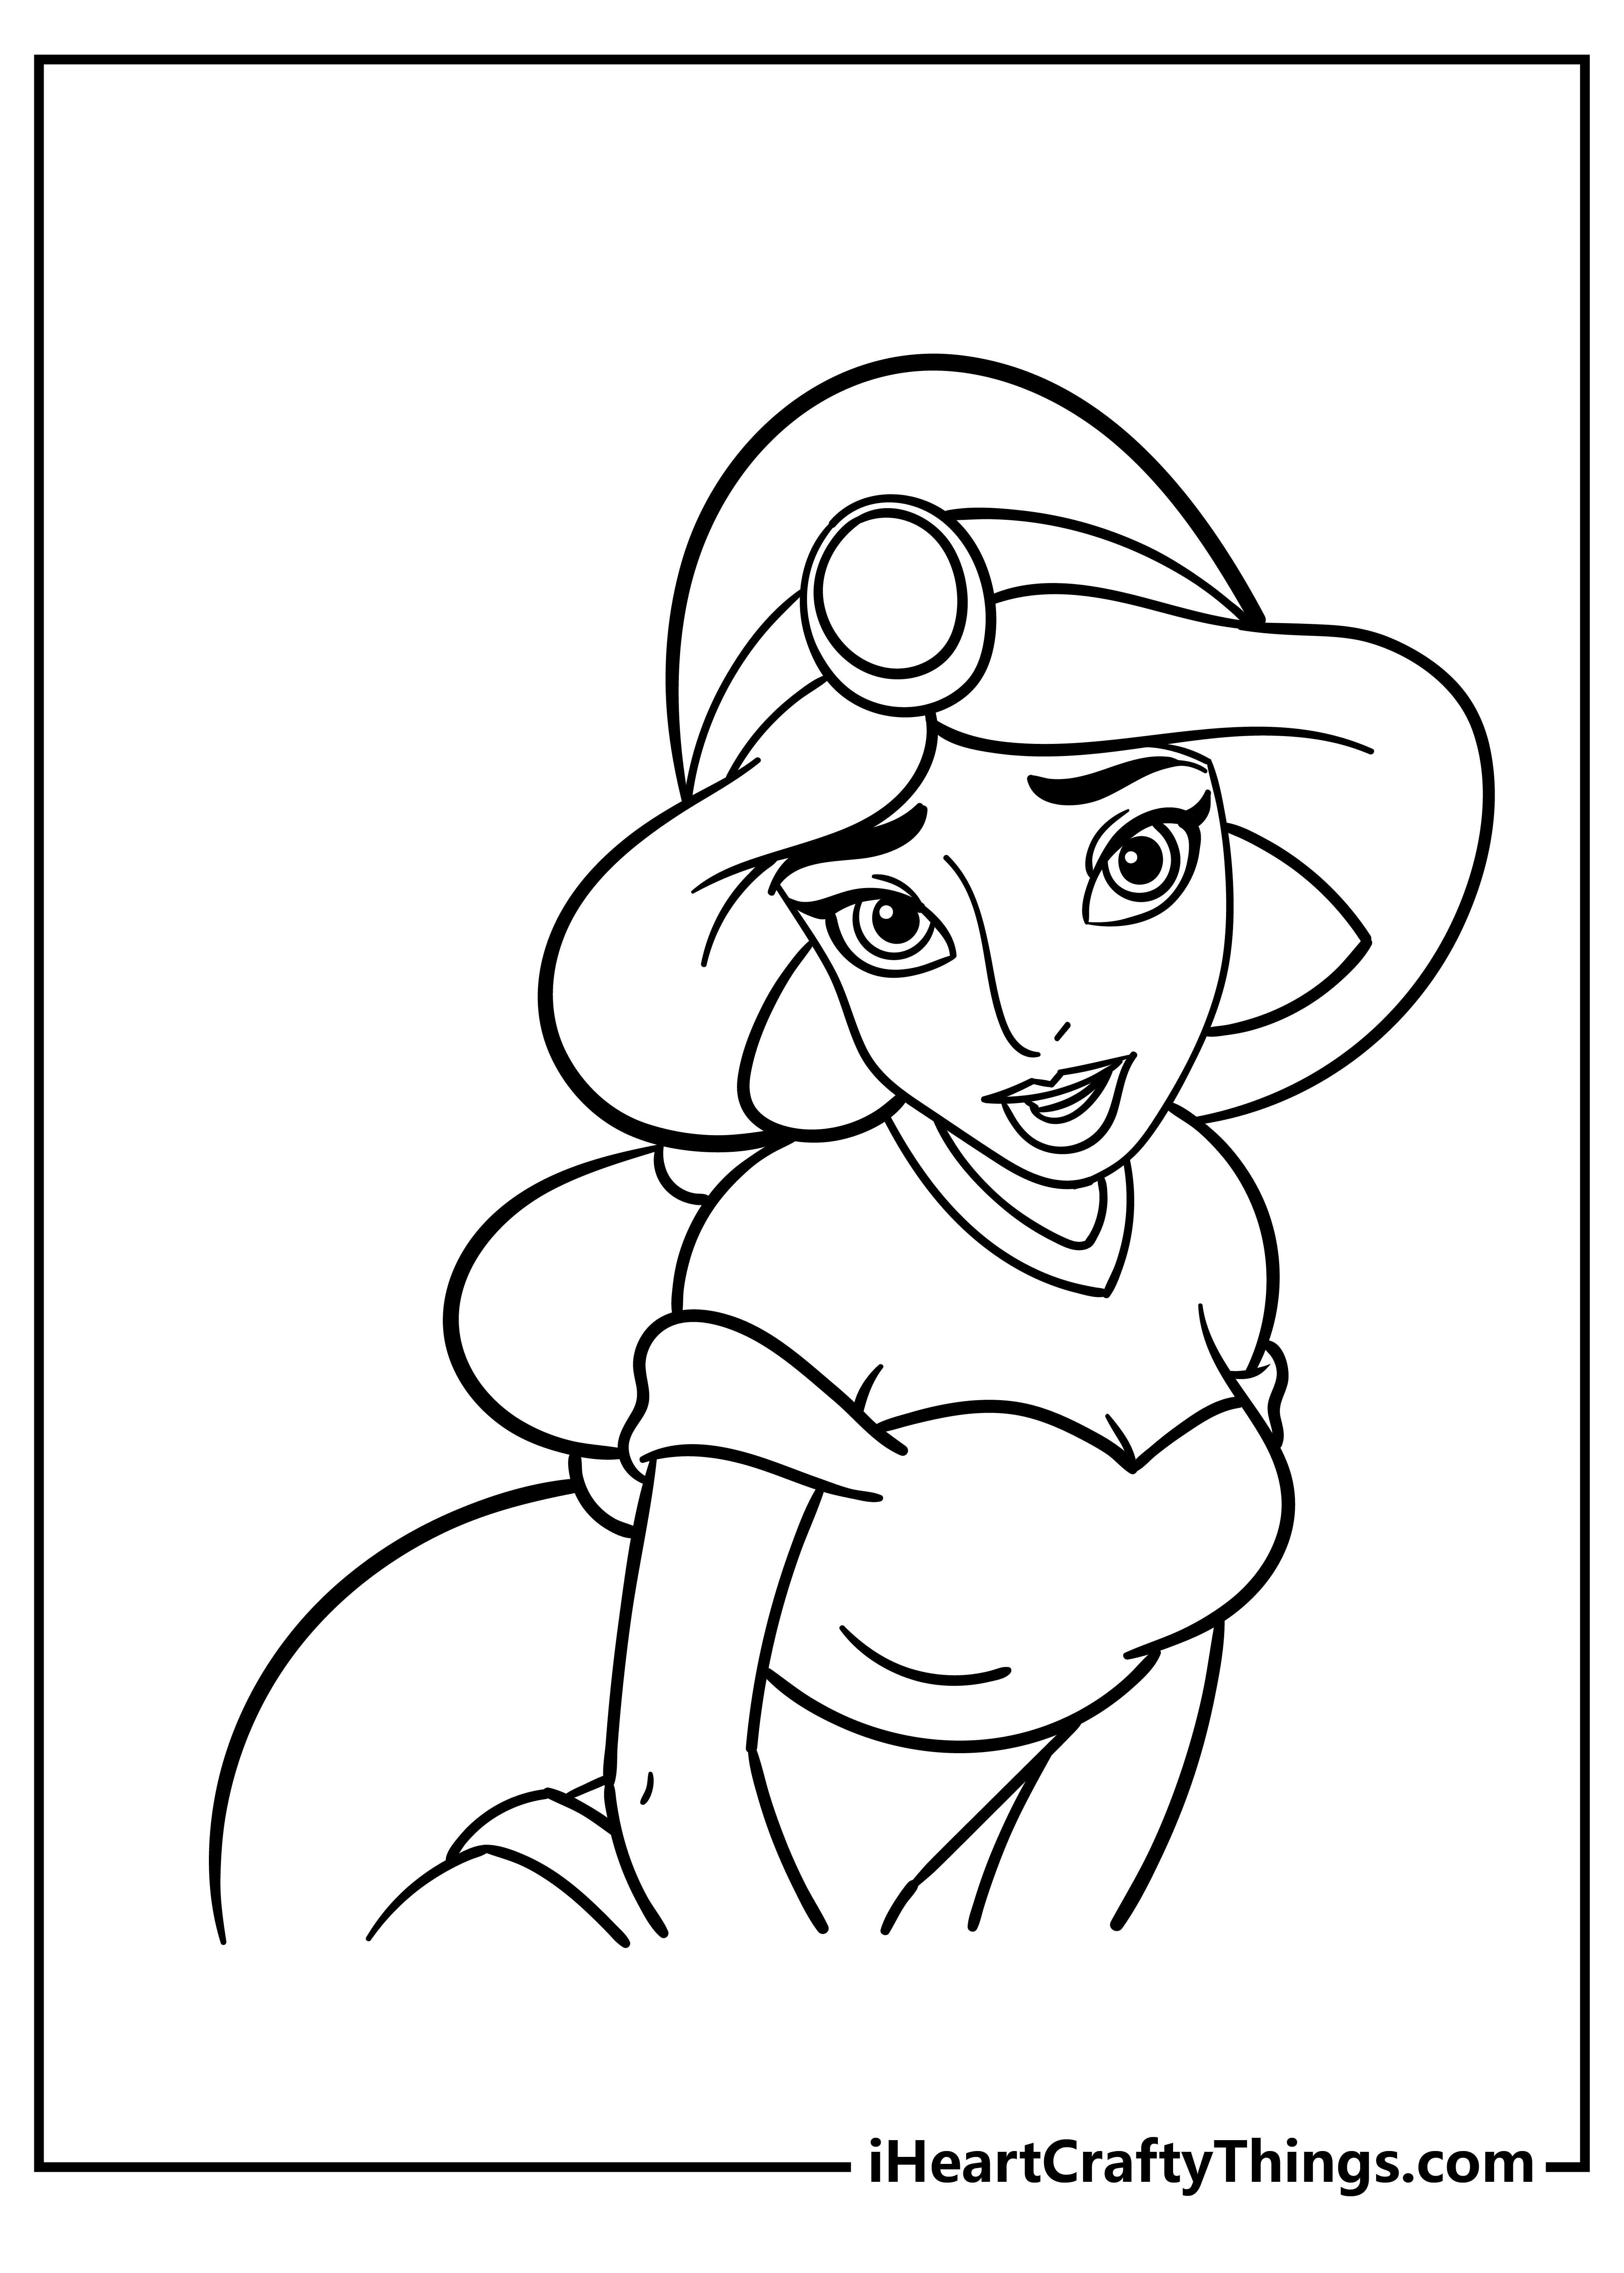 Jasmine Coloring Pages free pdf download